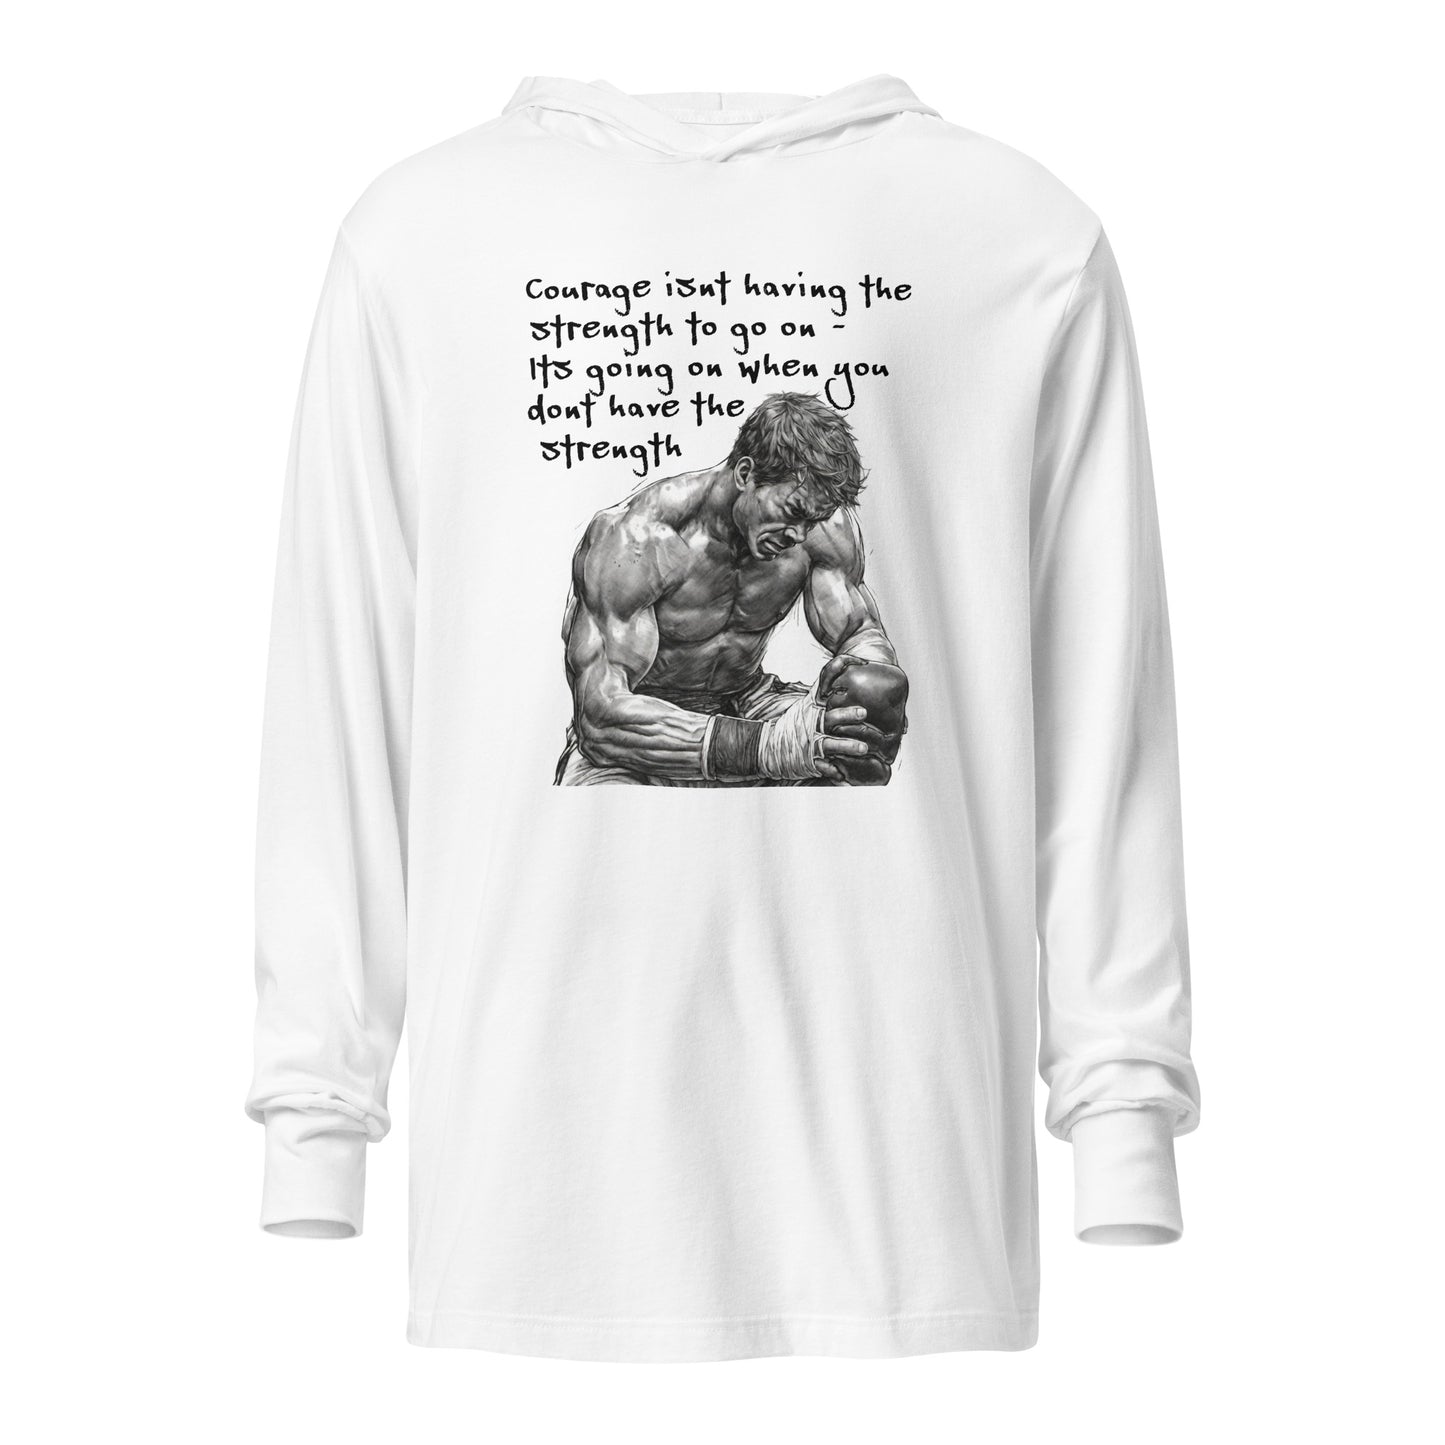 Courage and Strength Men's Hooded Long-Sleeve Tee White